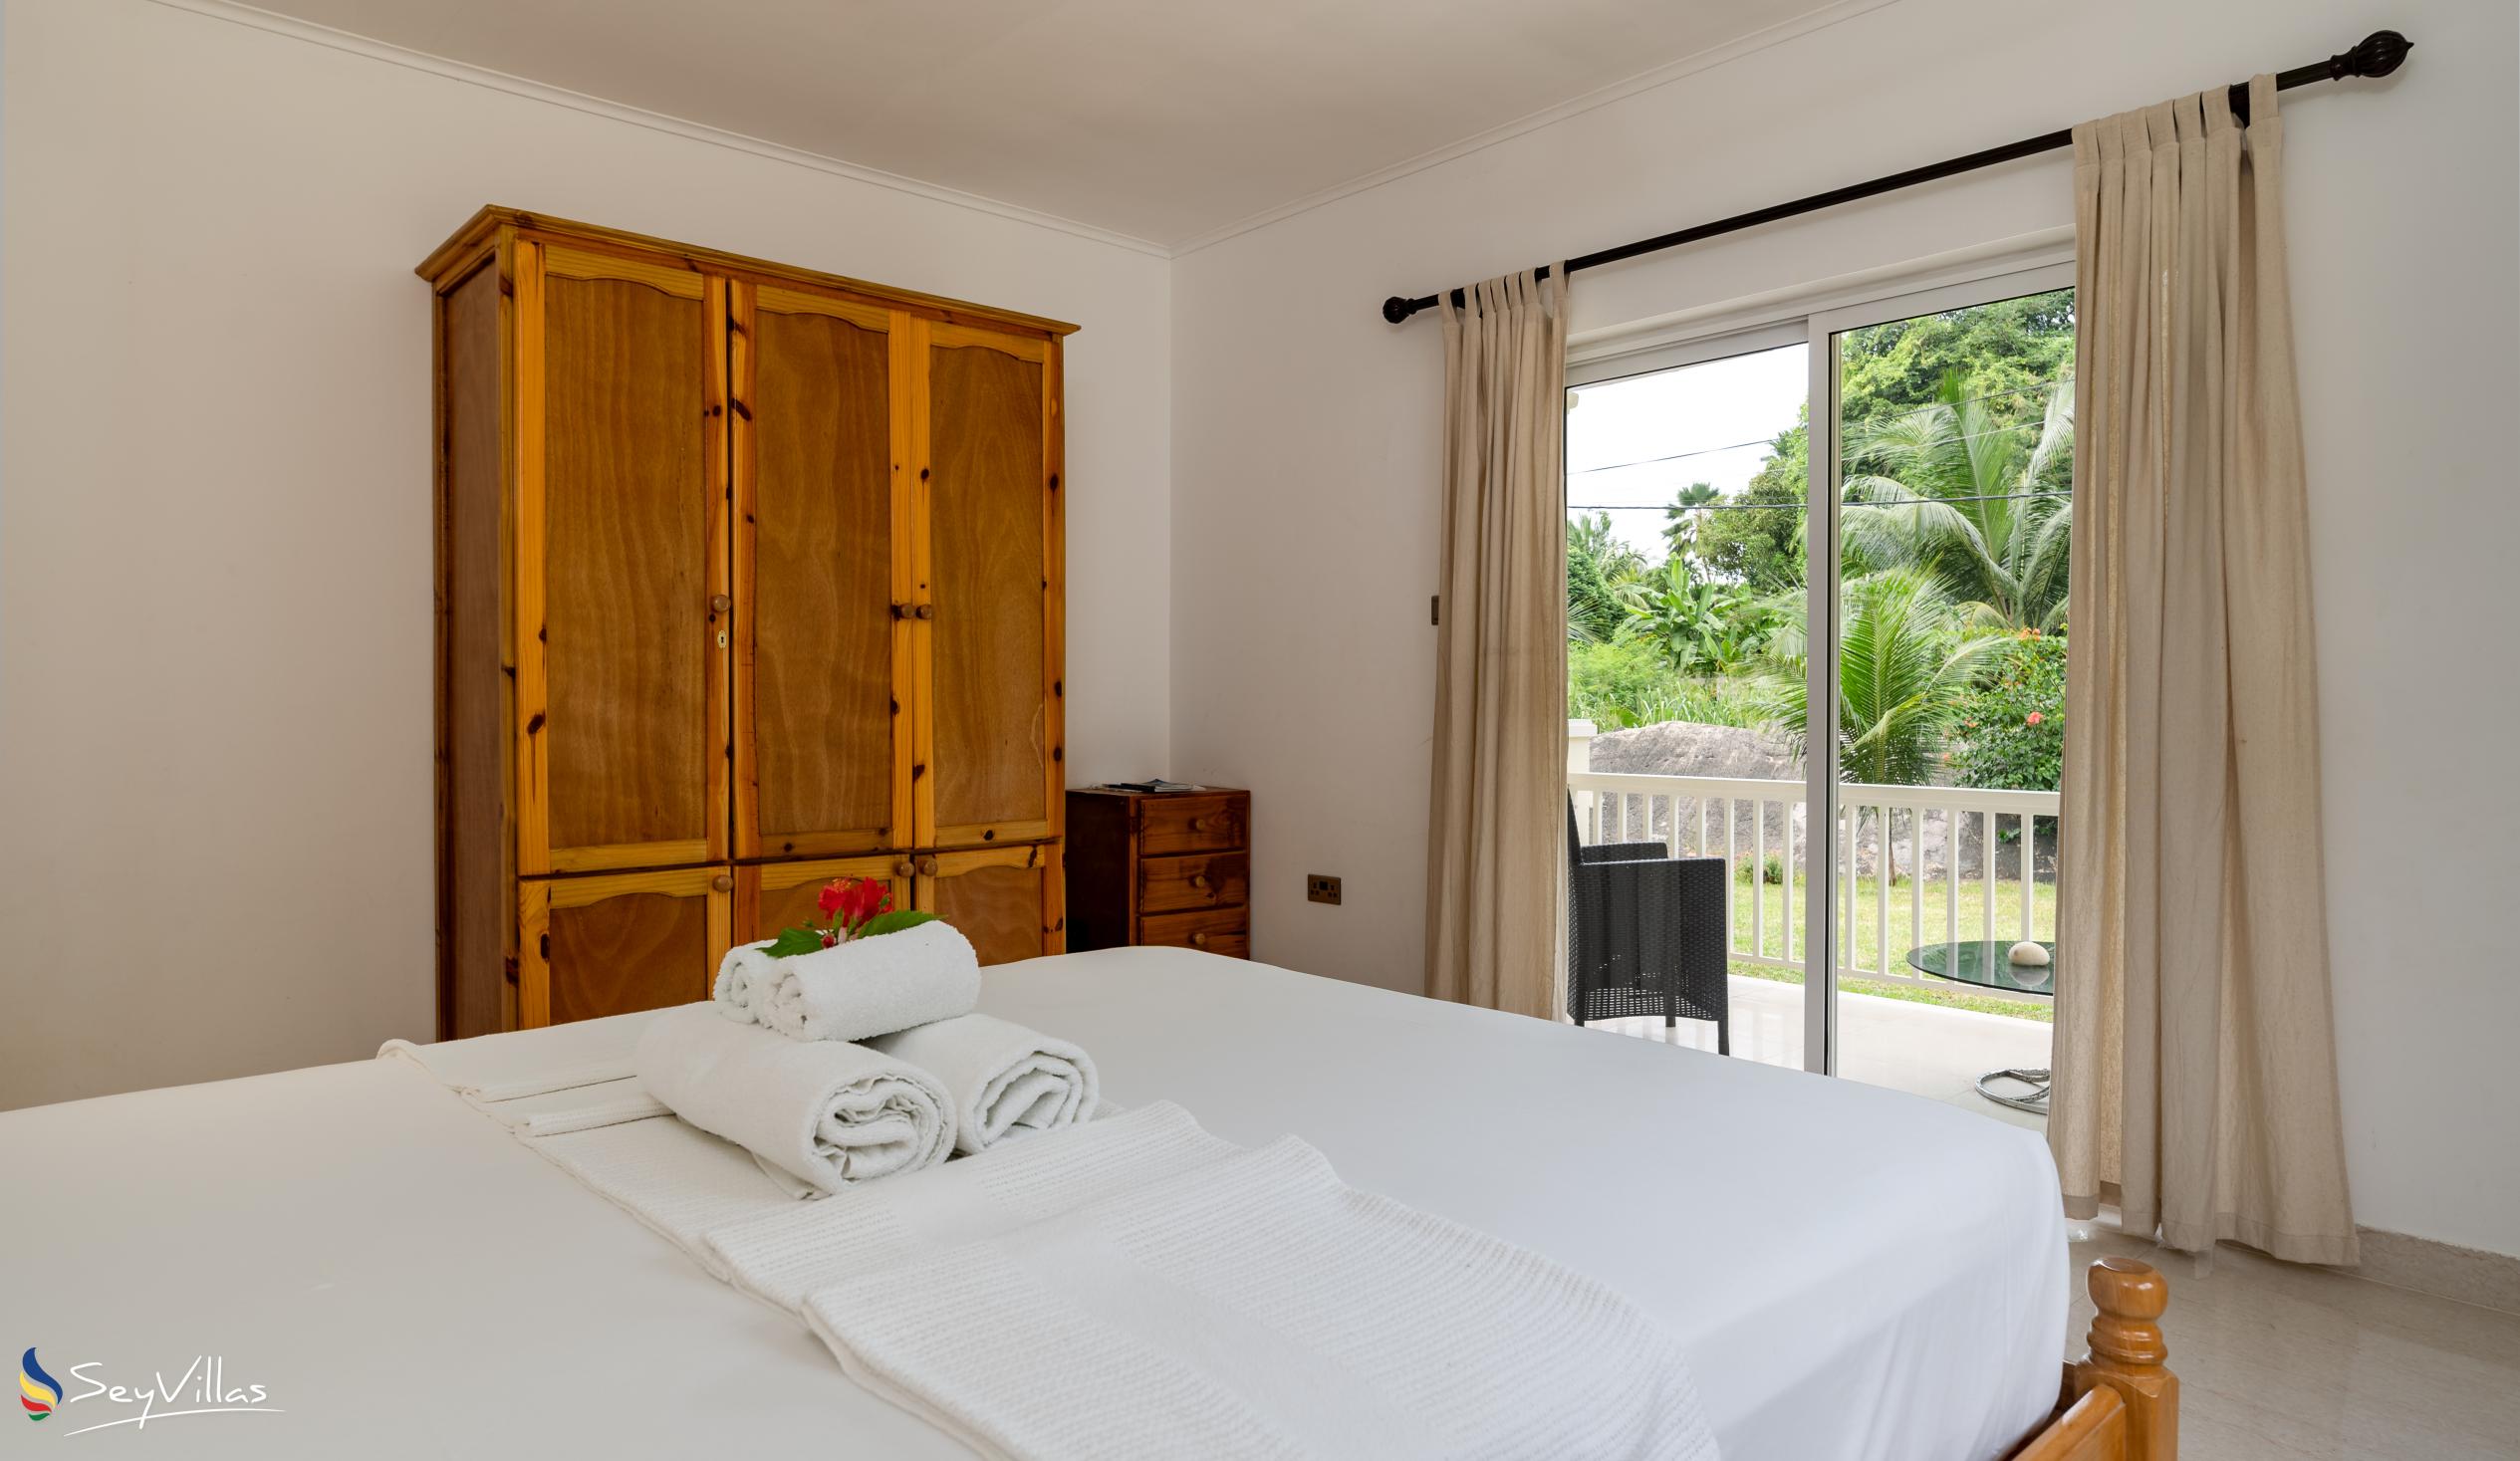 Photo 44: Julie's Holiday Home - Double Room with Garden View - Mahé (Seychelles)